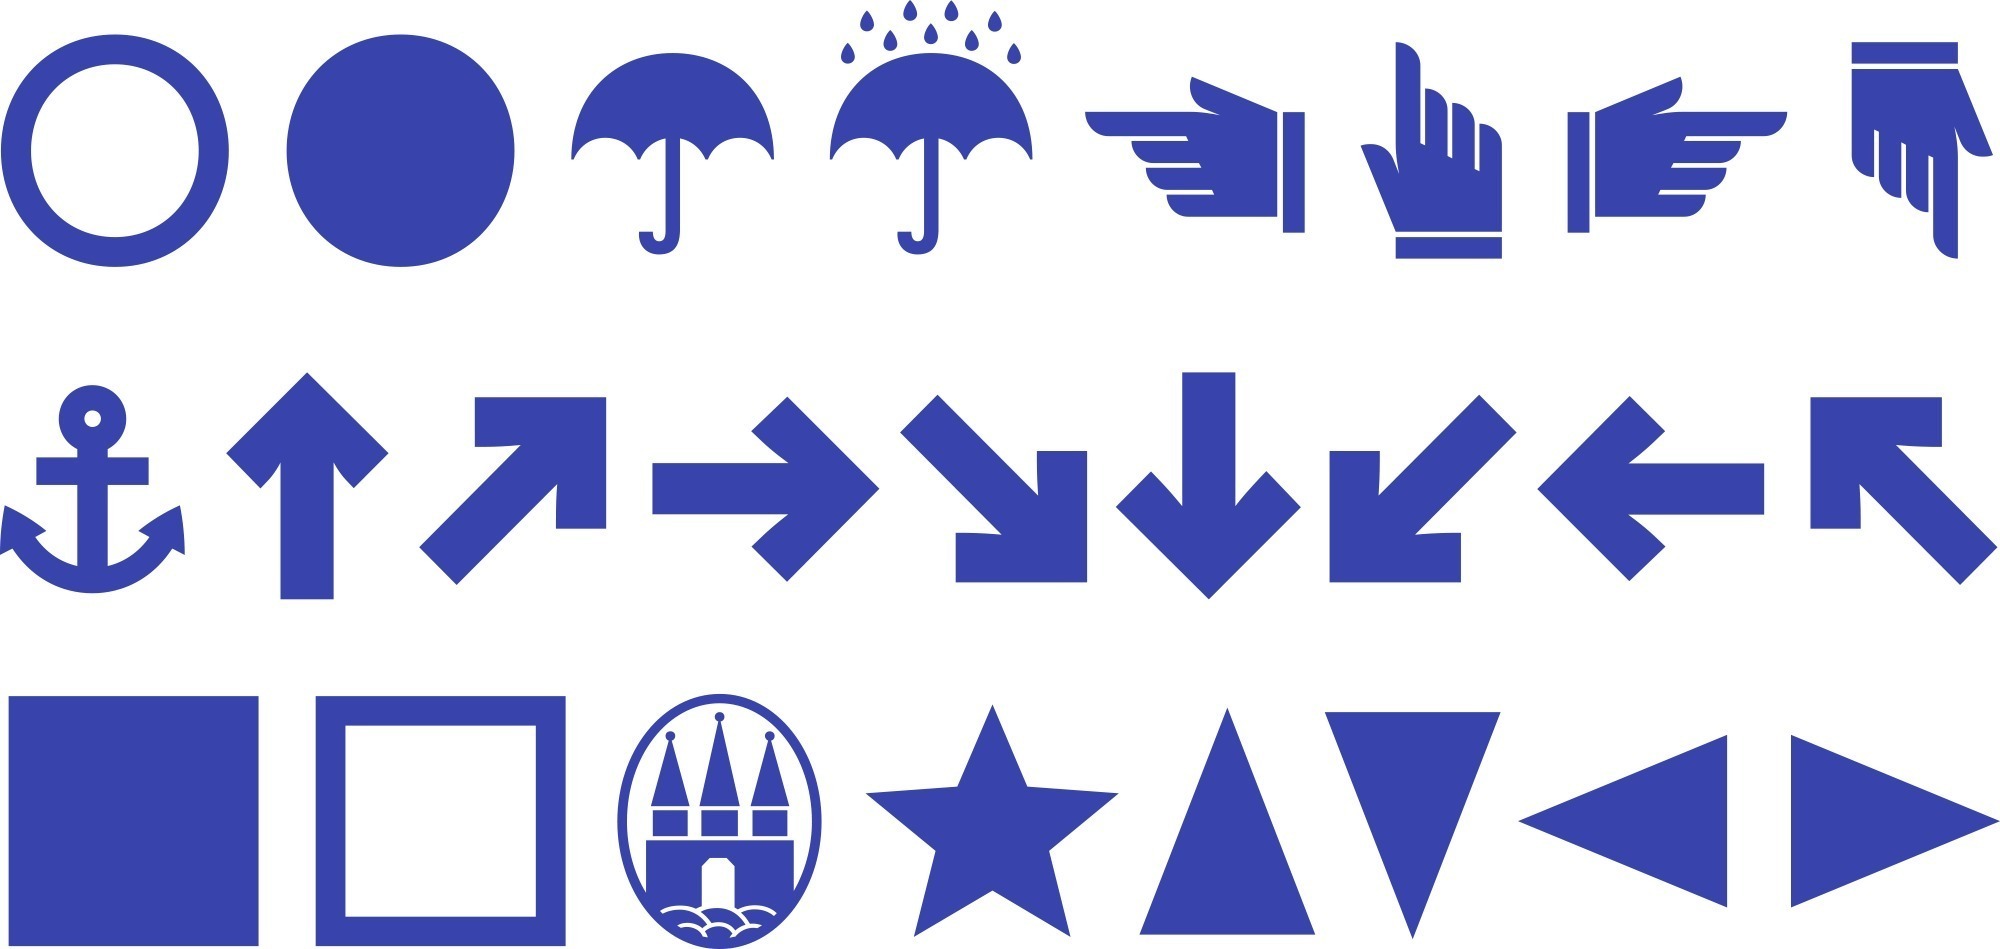 A selection of shapes, arrows and even hands (with little sleeves) round off the font. What’s more, note the selection of “Hanseatic features”: an umbrella, an anchor and the coat of arms of the city of Altona (the home of J. D. Trennert & Sohn). 